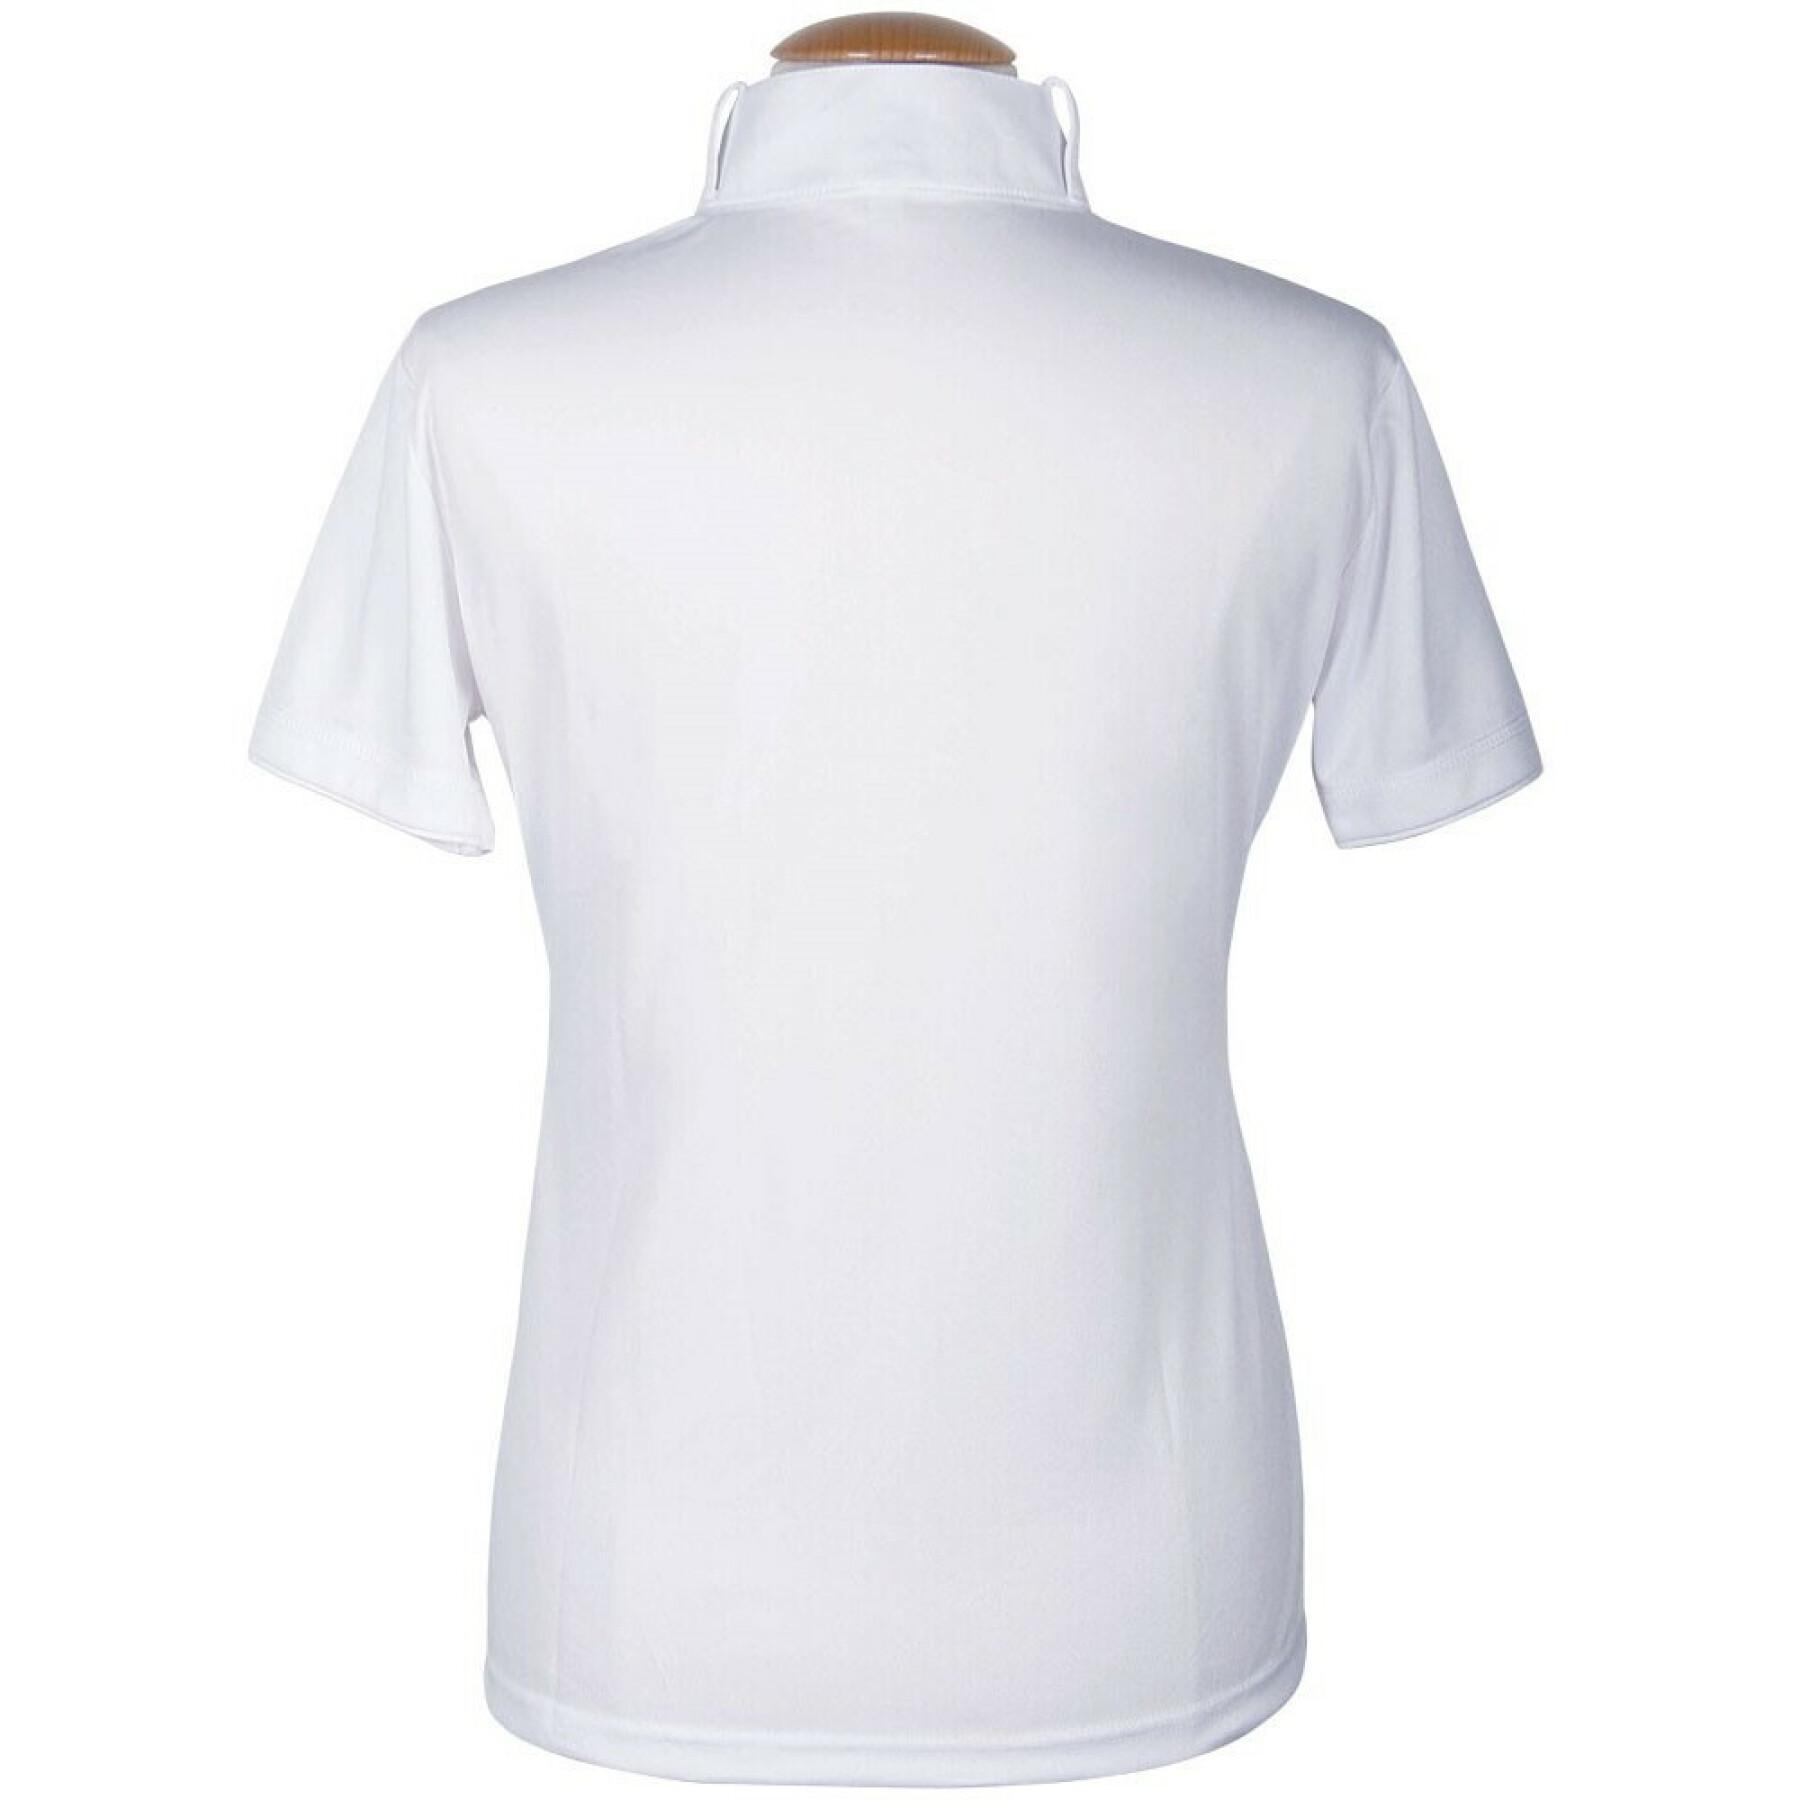 Women's competition polo shirt Harry's Horse Champ